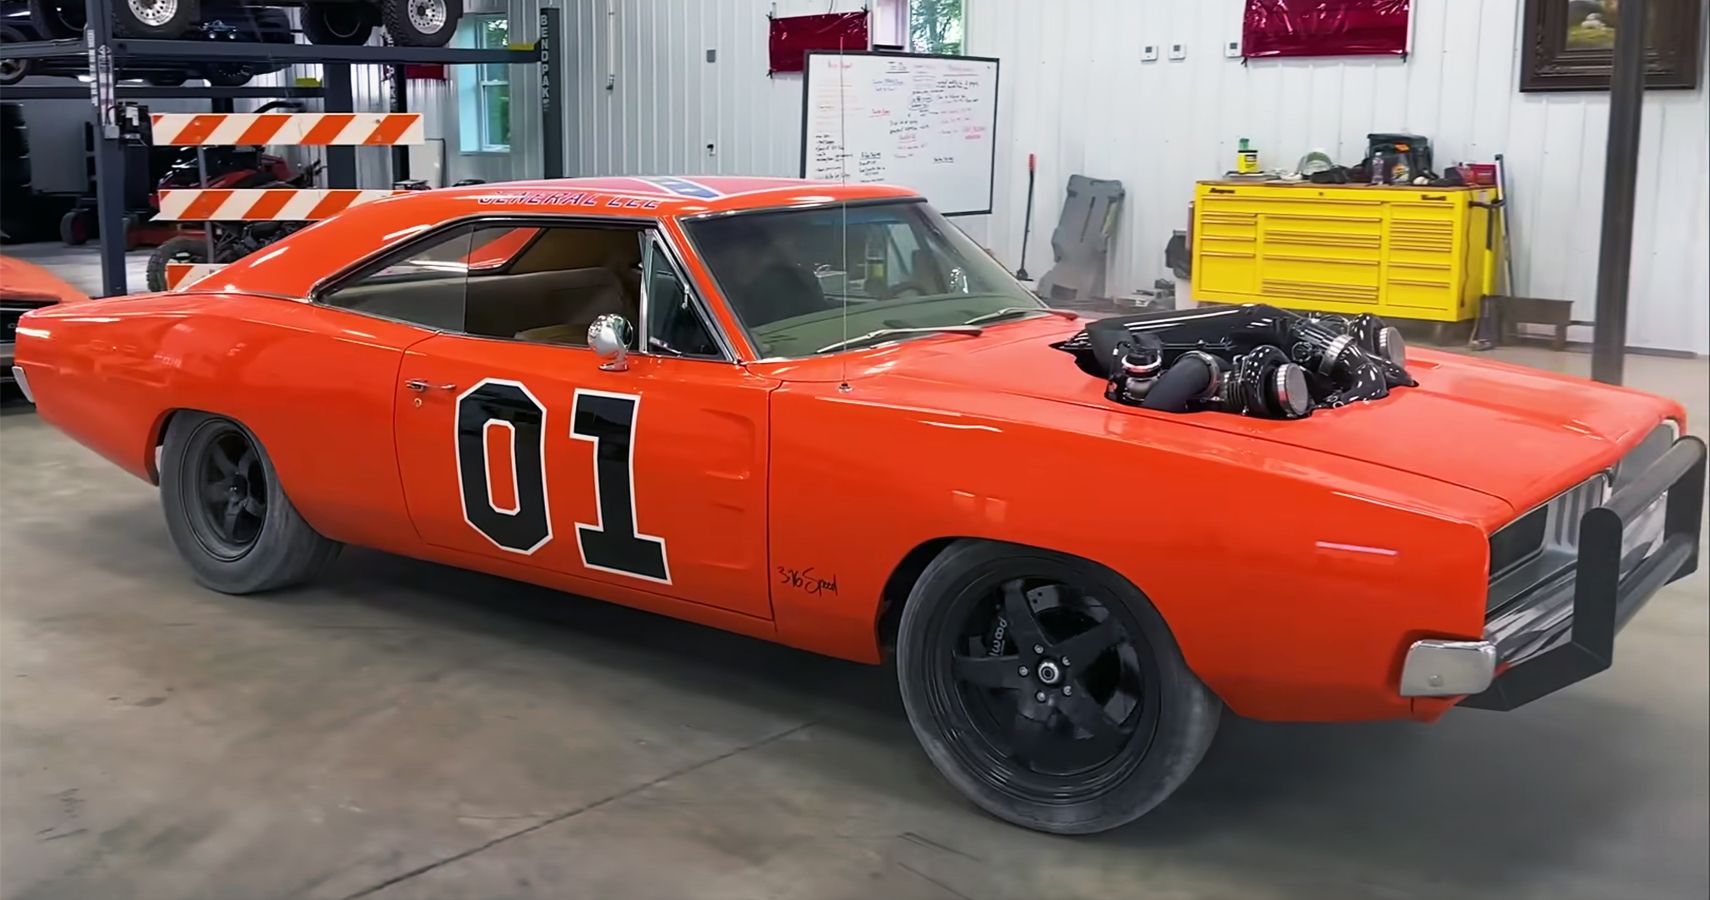 Check Out WhistlinDiesel's Insane 1,600-HP Dukes of Hazzard Dodge Charger General  Lee